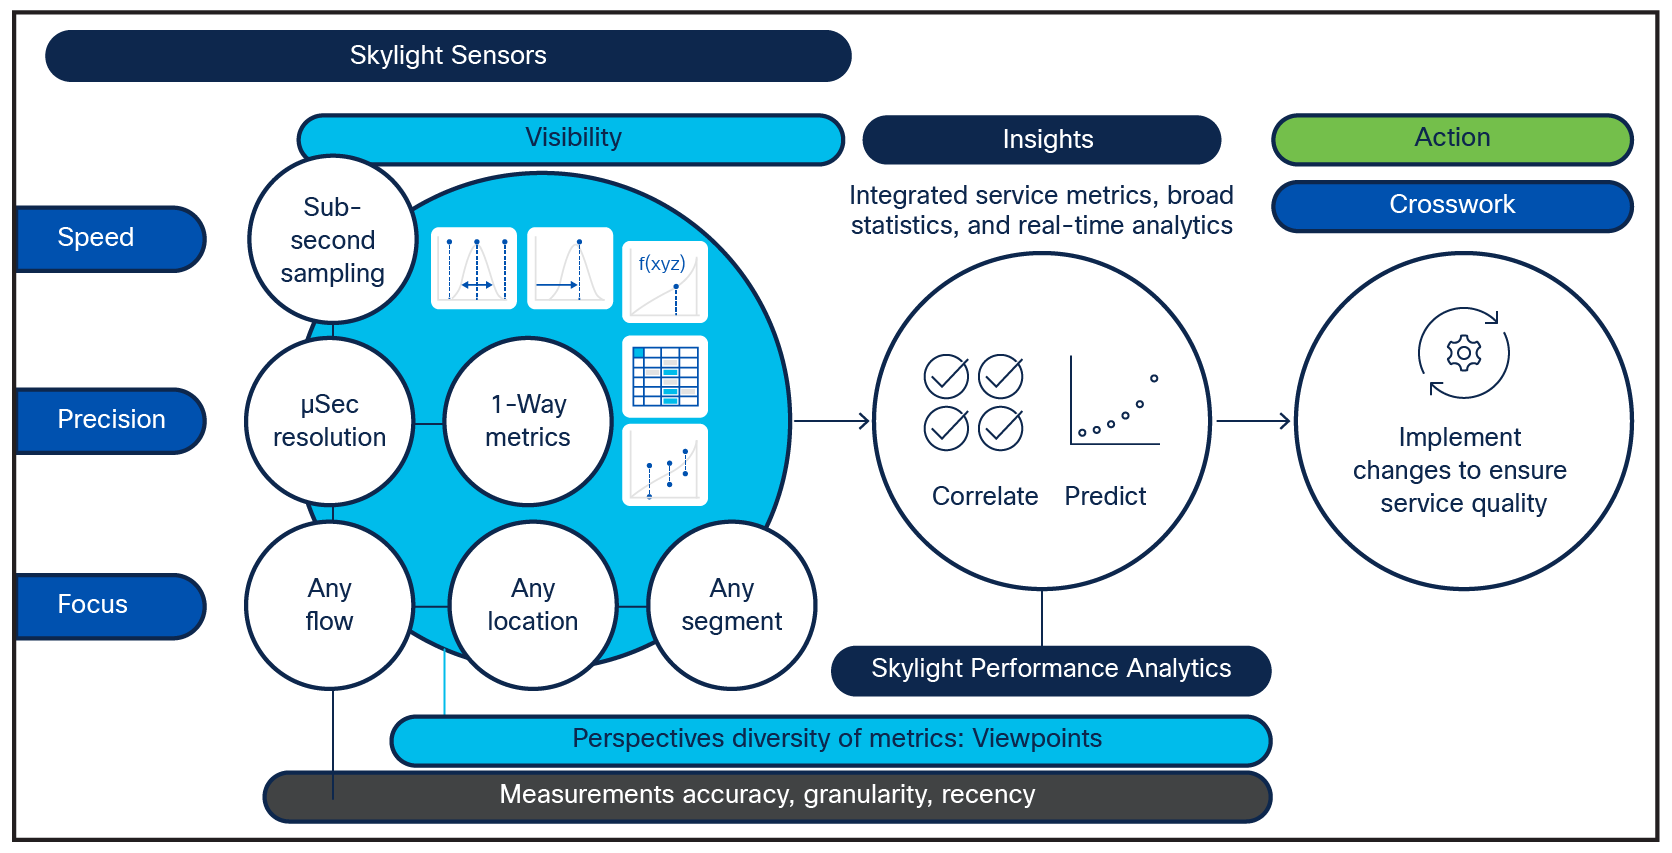 Skylight Sensors and Performance Analytics provide high-resolution monitoring for Layers 2 and 3, forming a foundation for advanced assurance automation.